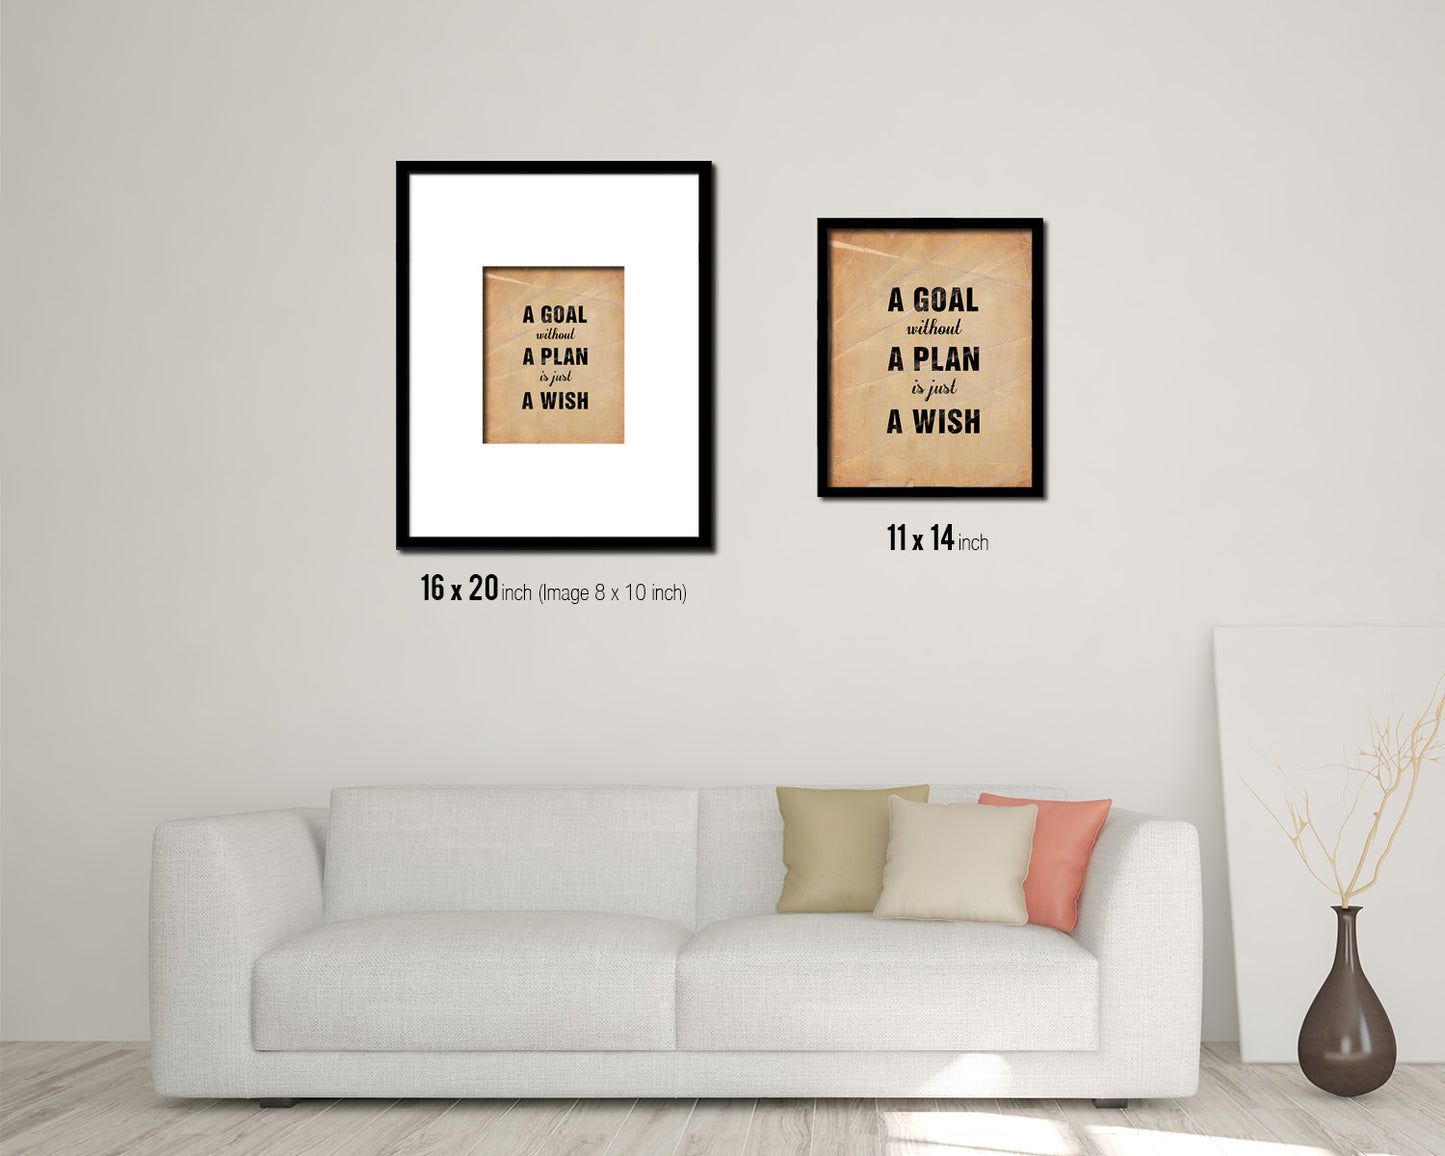 A goal without a plan is just a wish Quote Paper Artwork Framed Print Wall Decor Art